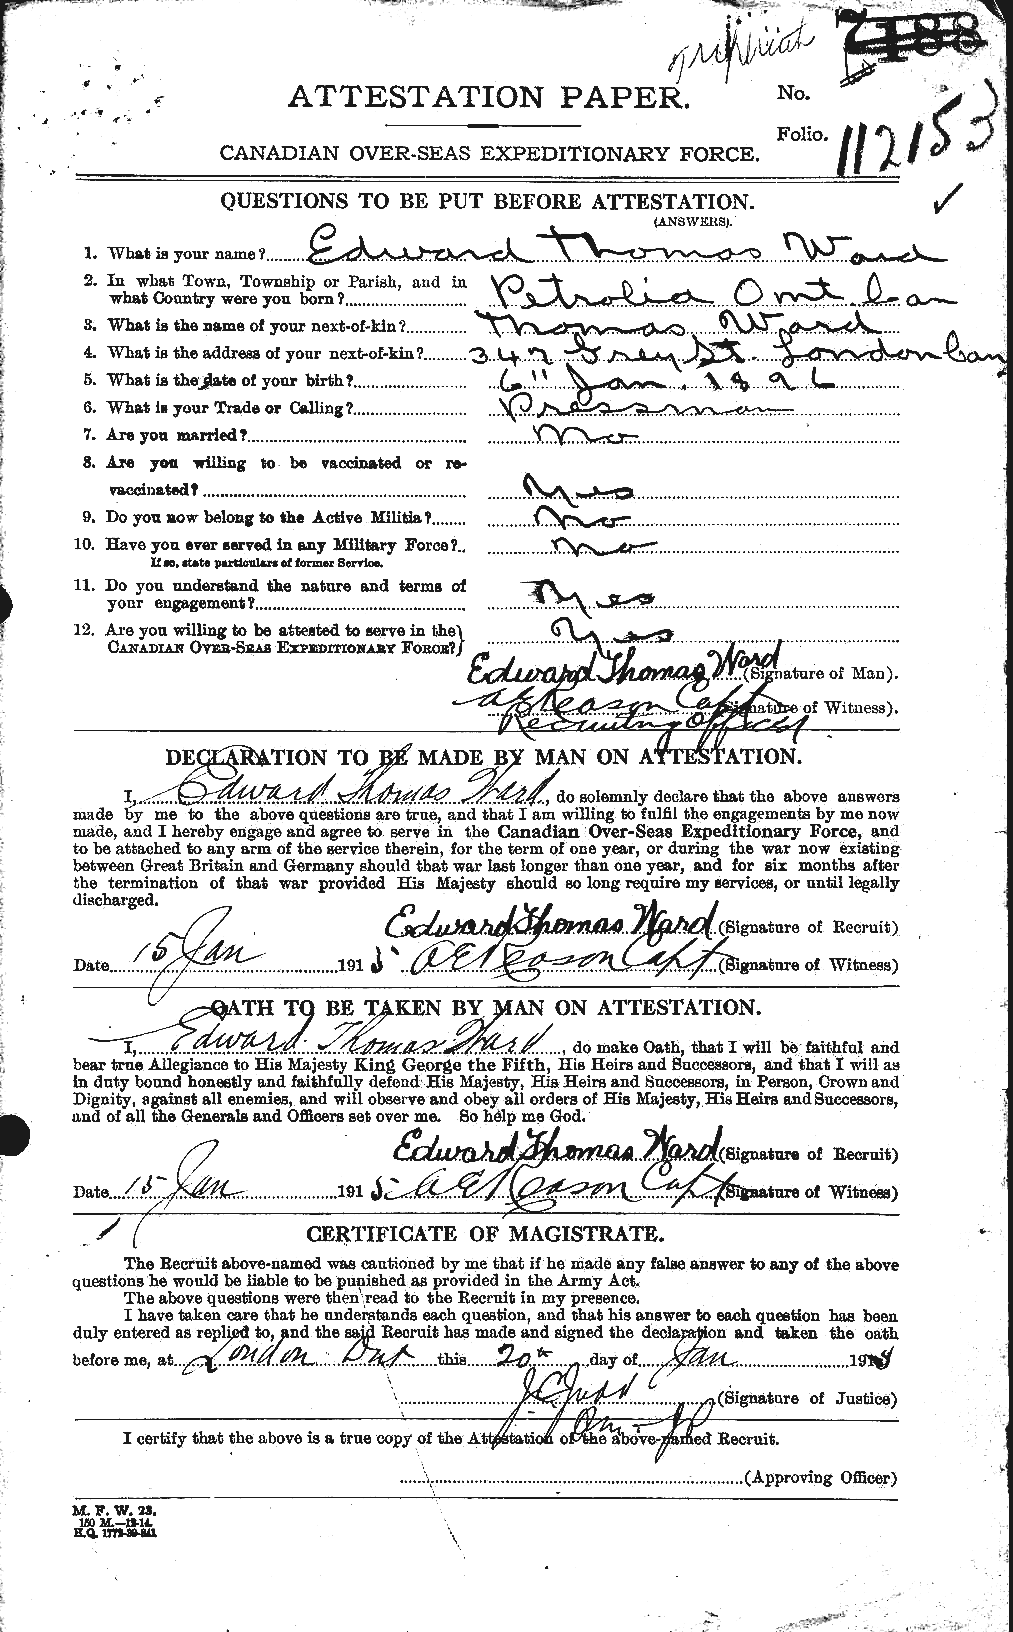 Personnel Records of the First World War - CEF 657657a